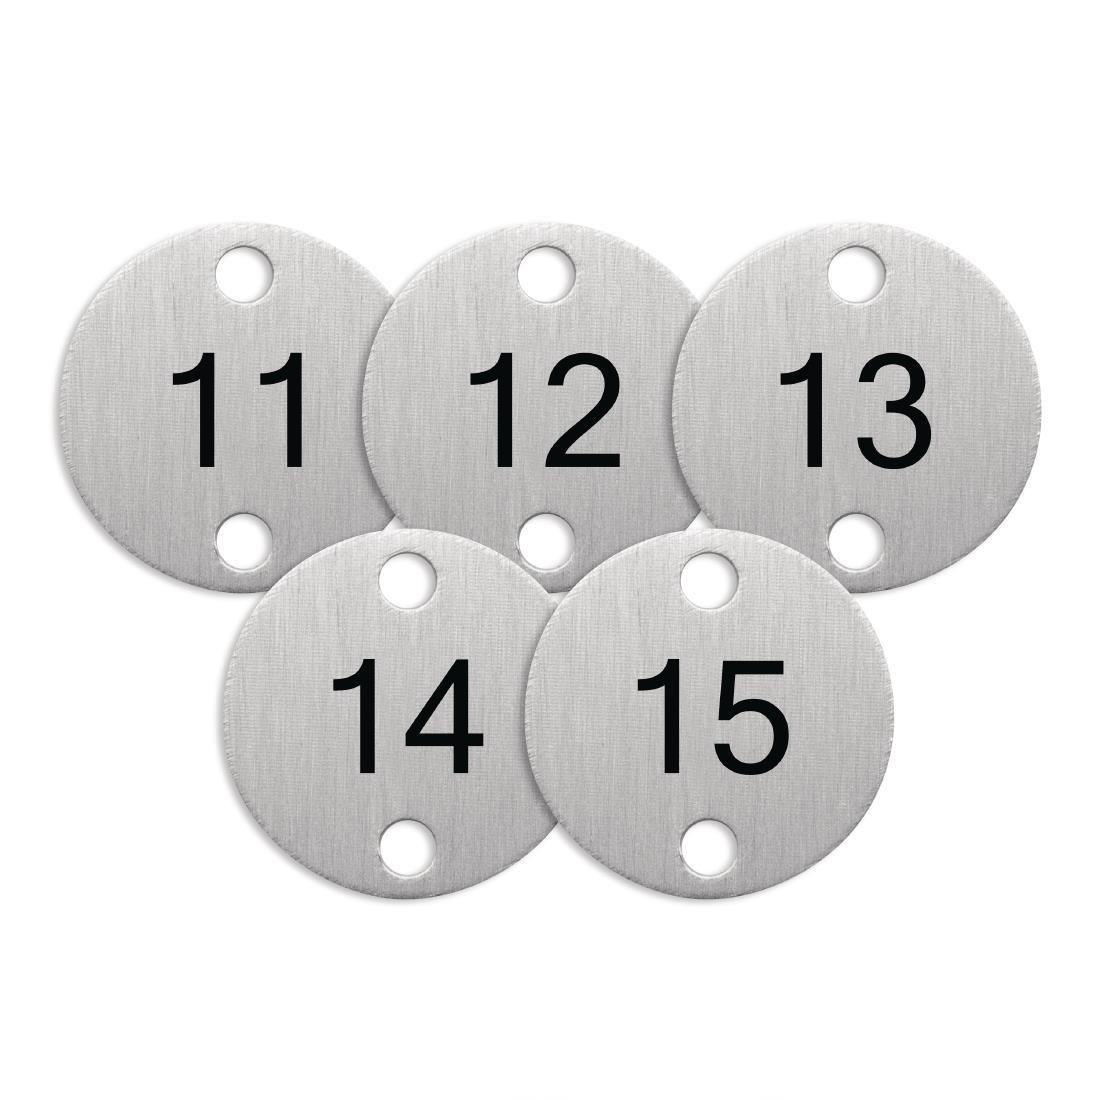 Bolero Table Numbers Silver (11-15) - DY772  - 3